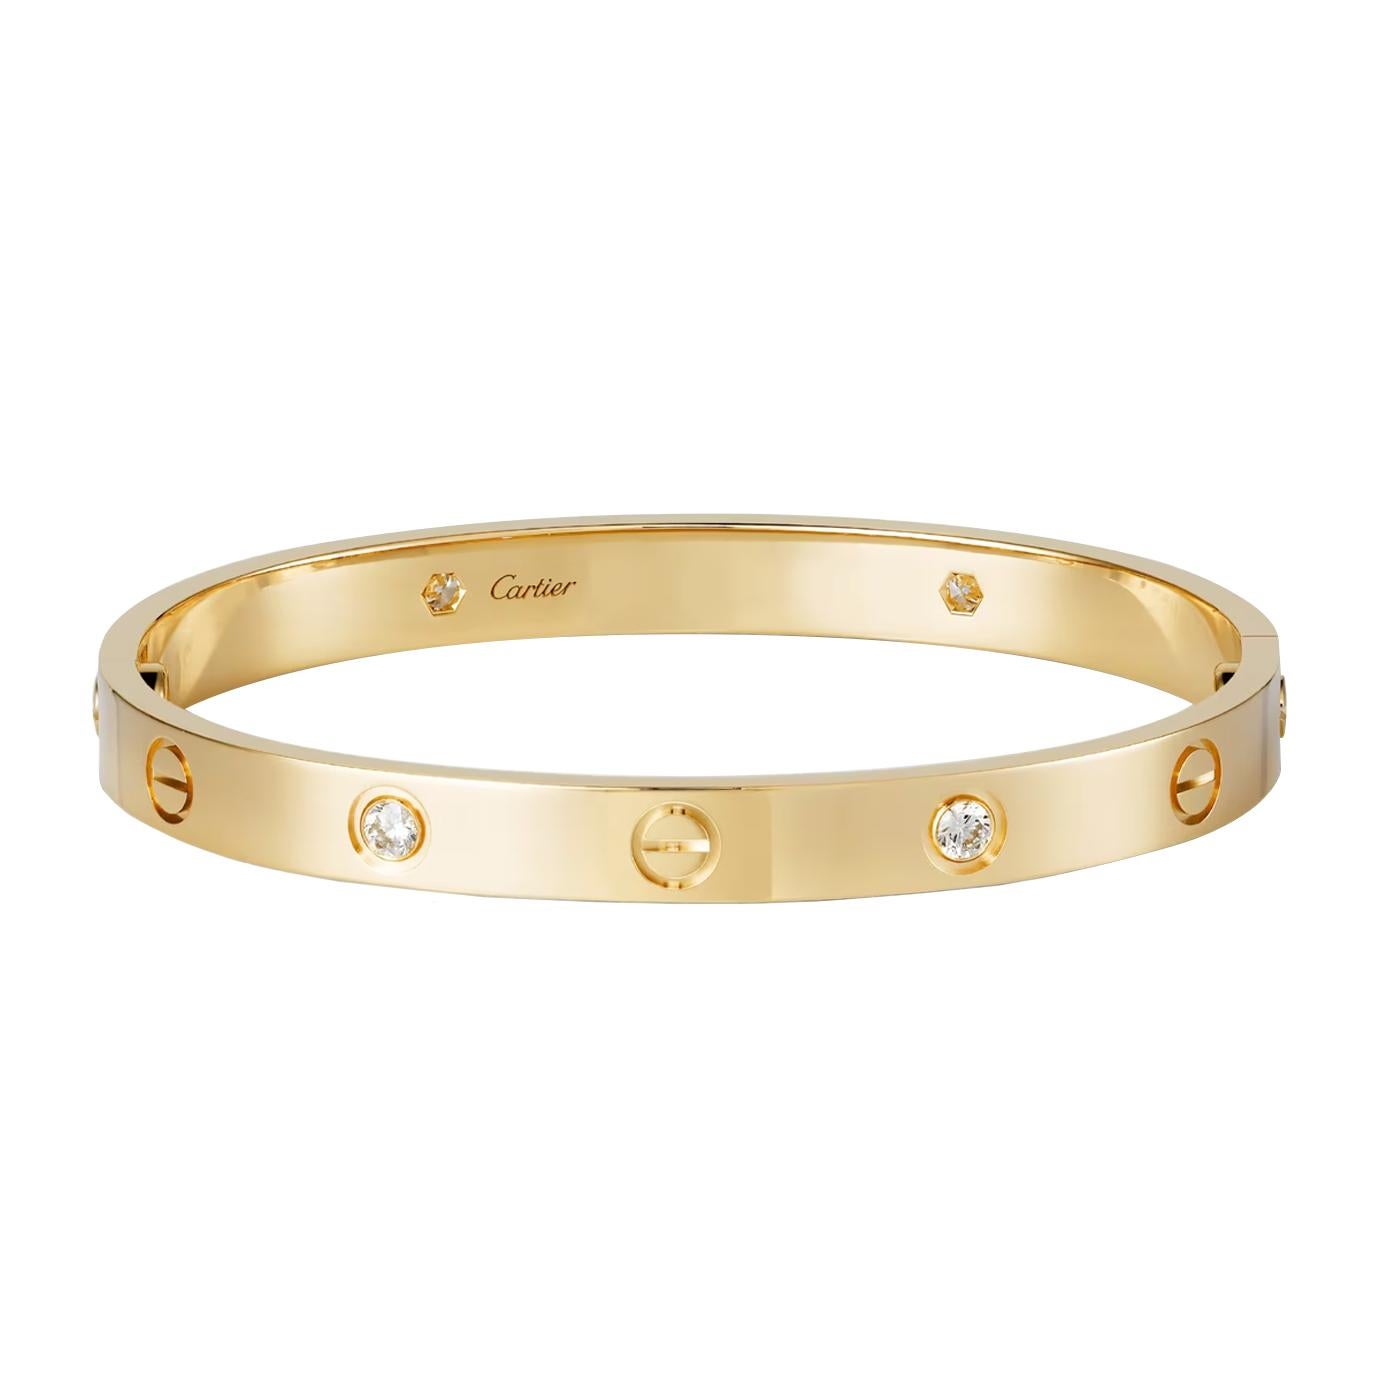 LOVE bracelet, 18K yellow gold (750/1000), set with 4 brilliant-cut diamonds totaling 0.42 carats. Comes with a screwdriver. Width: 6.1 mm. Created in New York in 1969, the LOVE bracelet is an icon of jewelry design a close-fitting, oval bracelet